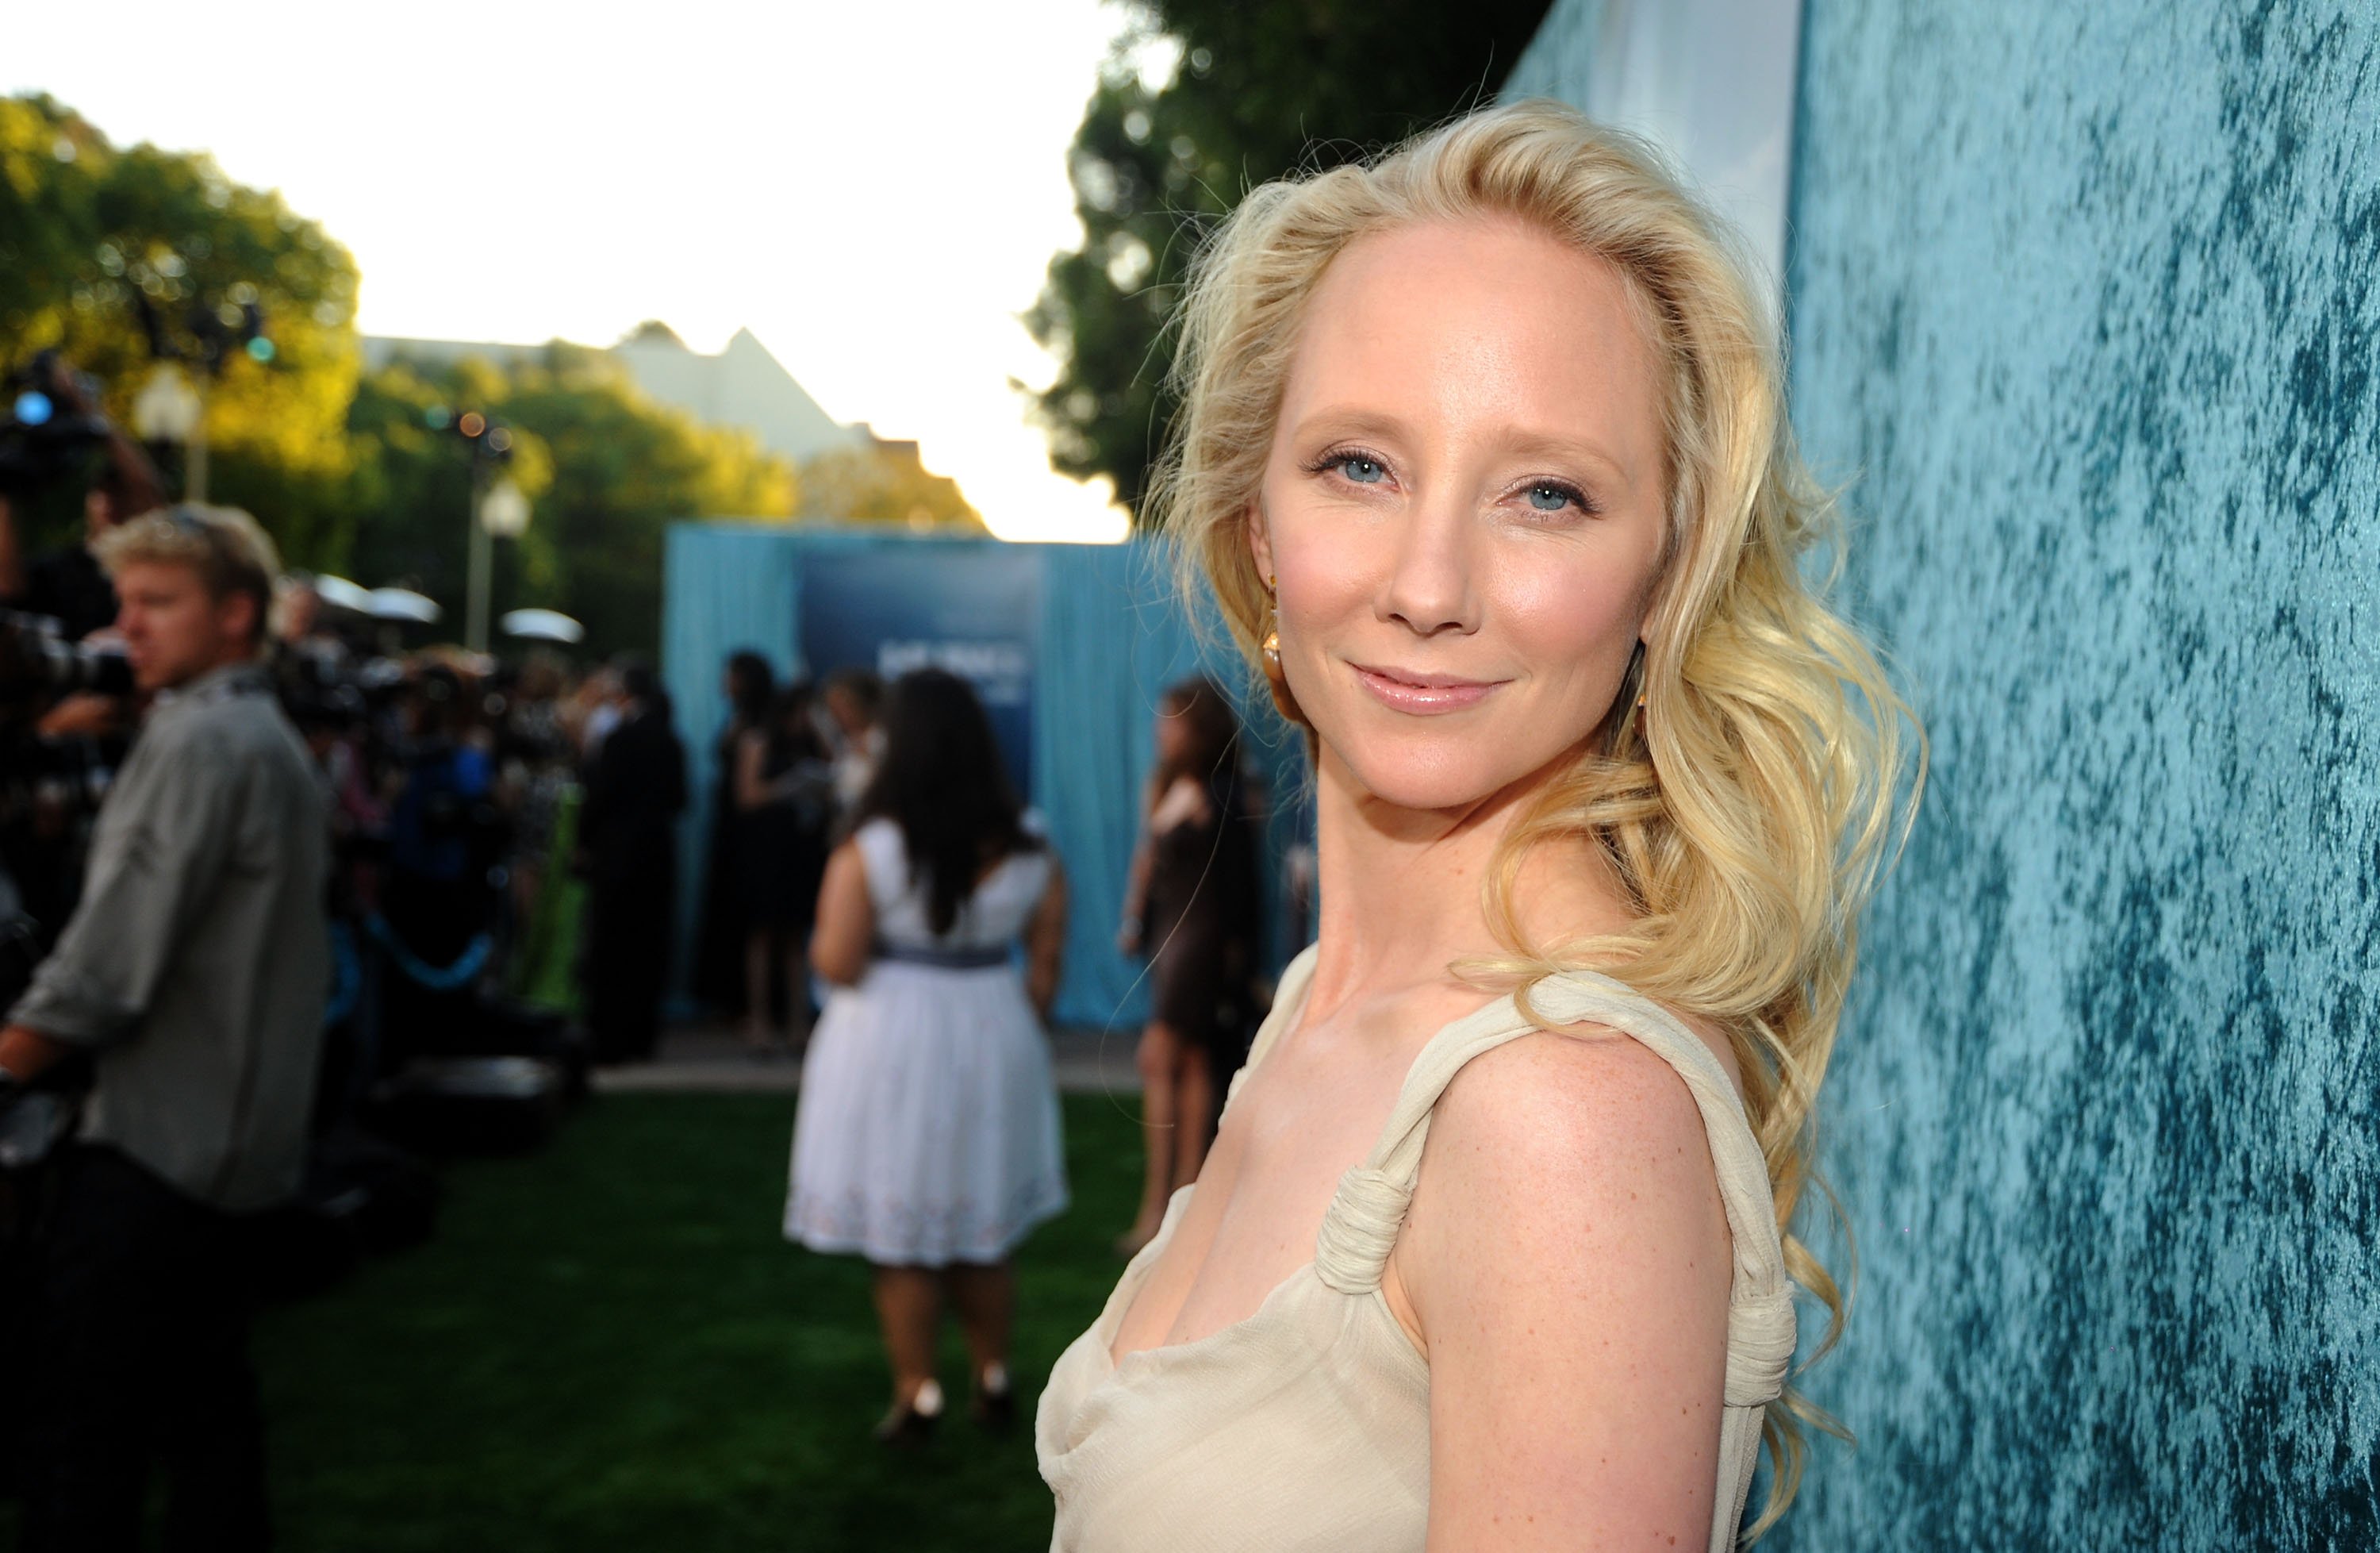 Anne Heche poses in a cream colored dress at a media event. 